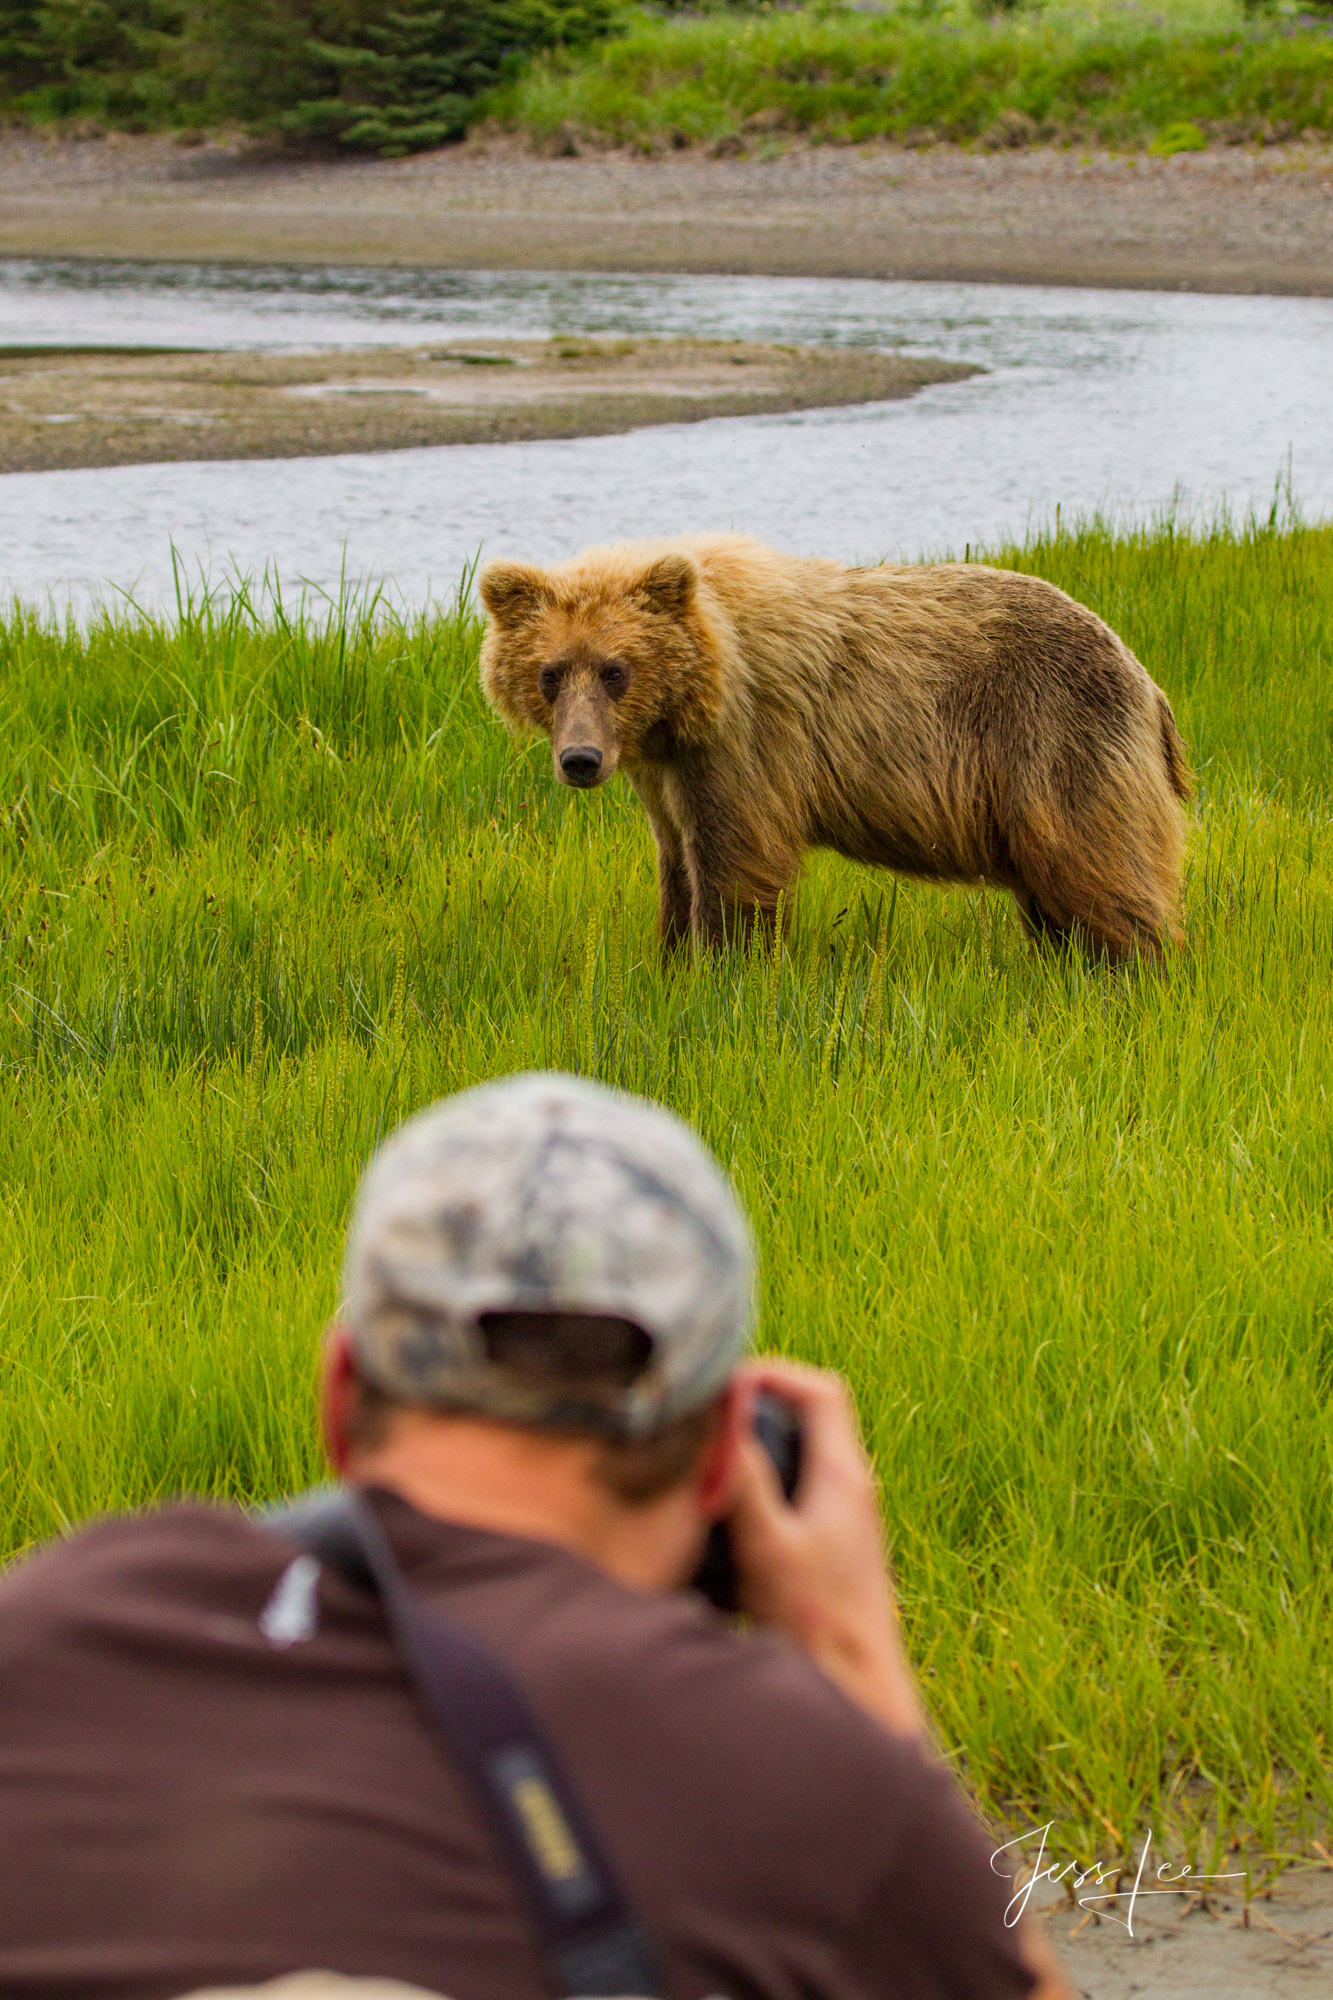 Alaska Grizzlys, Cubs, Moms, photographers, Limited edition of 800 prints. These Grizzly bear fine art wildlife photographs are...